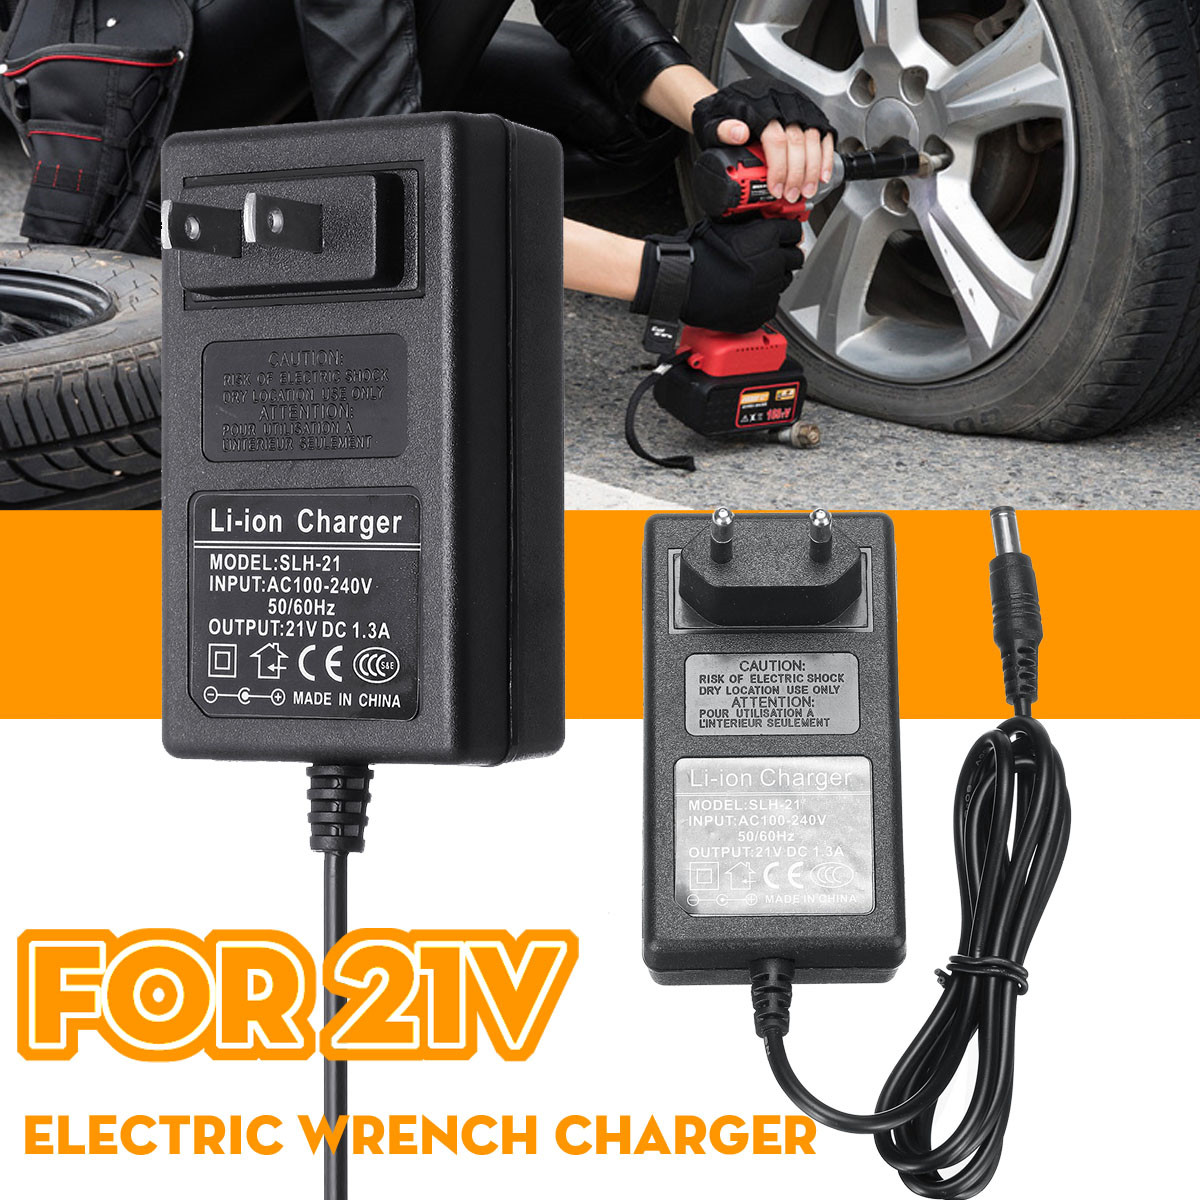 21V-13A-Charger-Adapter-for-Lithium-Li-ion-LiPo-Battery-Packs-Electric-Wrench-1437230-1